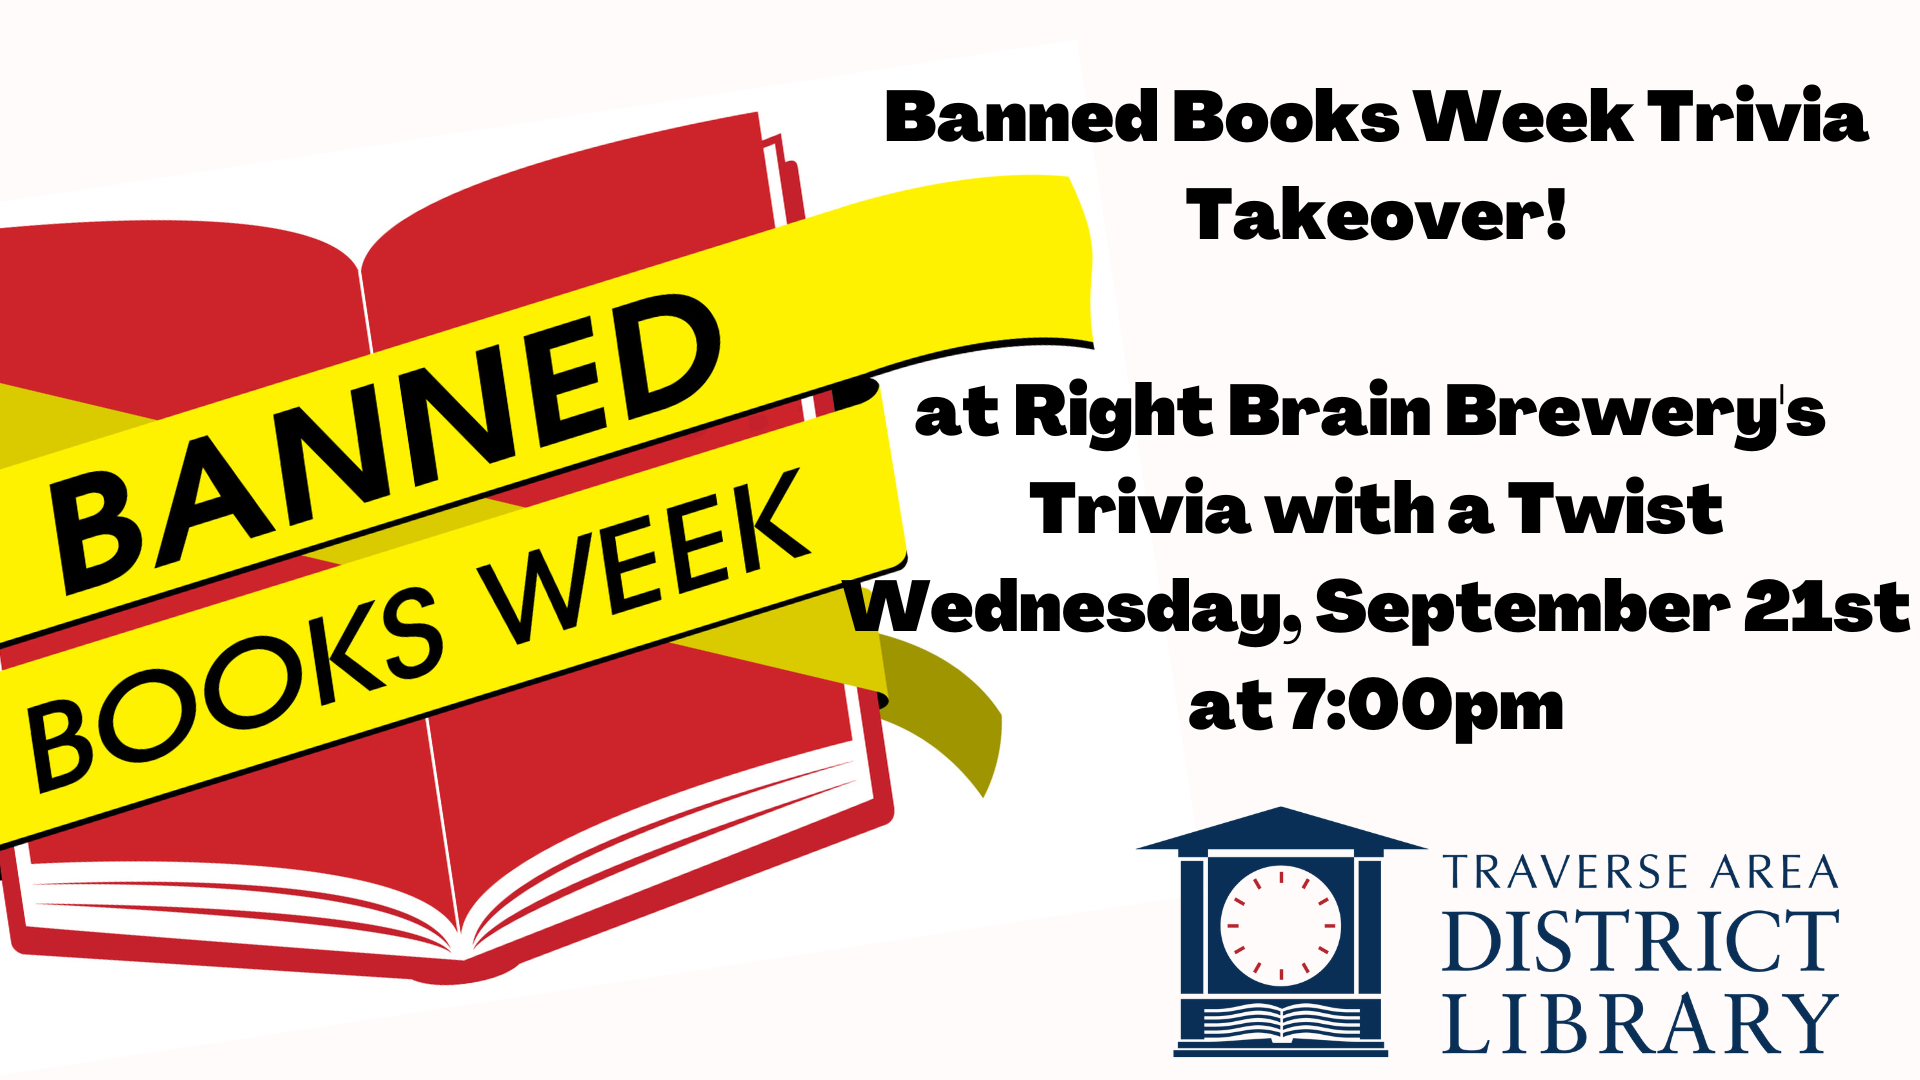 Banned books week trivia takeover Wednesday, September 21, 2022 at 7 pm